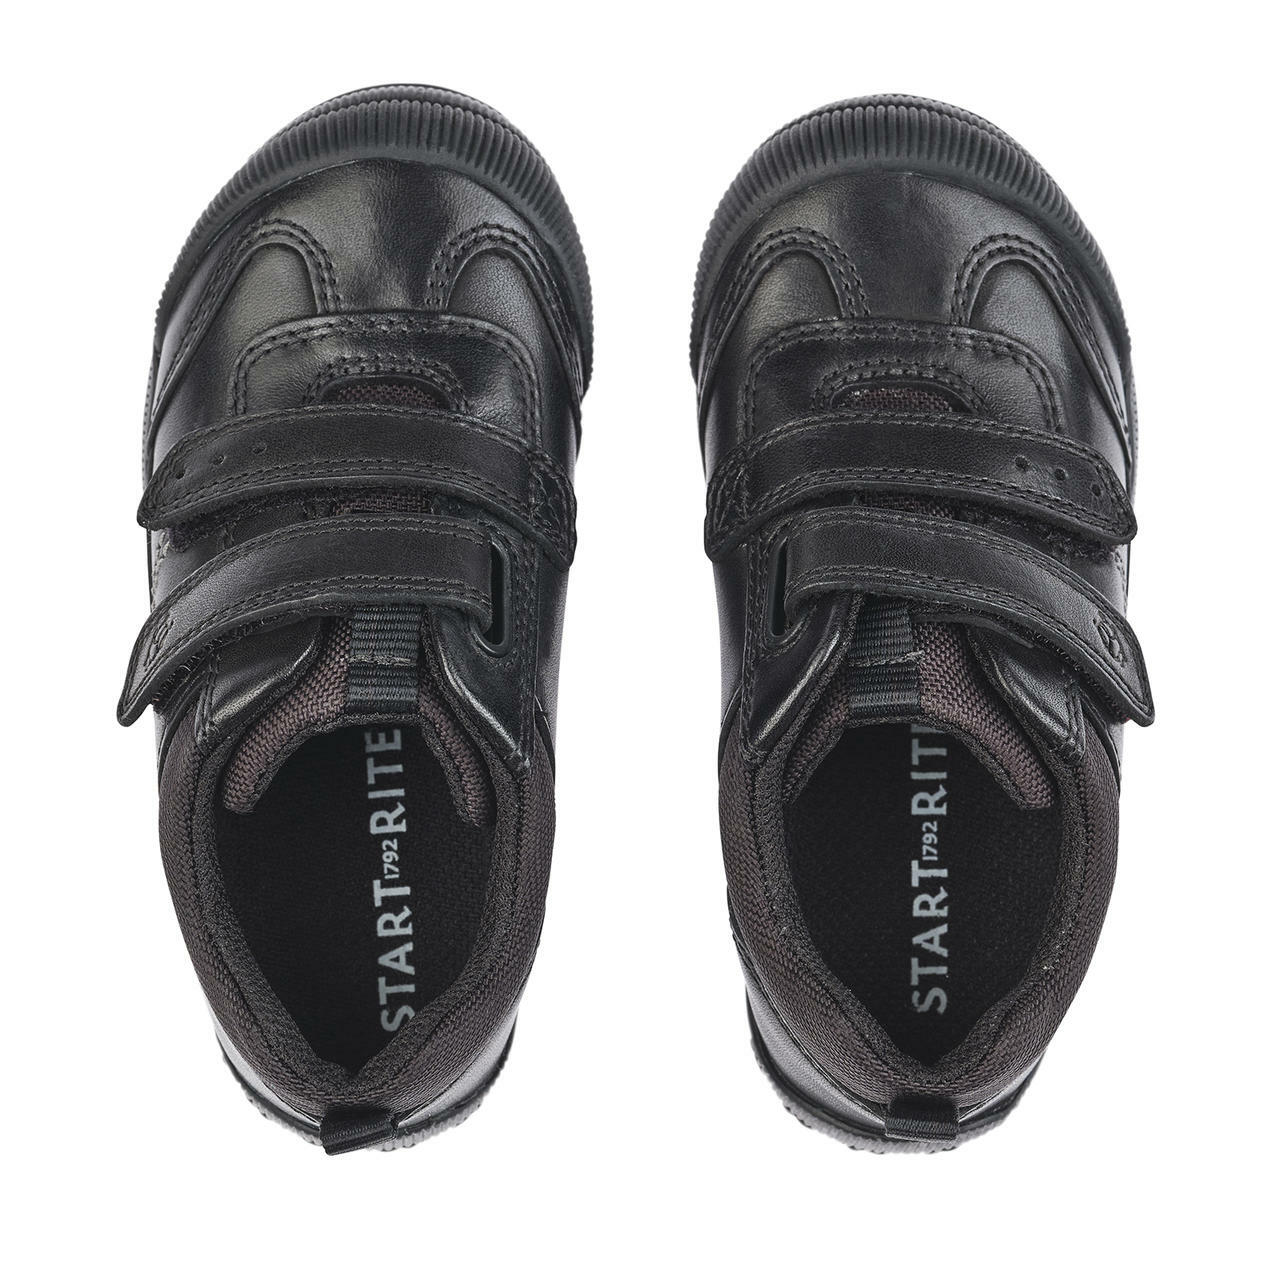 A pair of boys pre school shoes by Start Rite,style Tickle, in black leather with double velcro fastening. Top view.